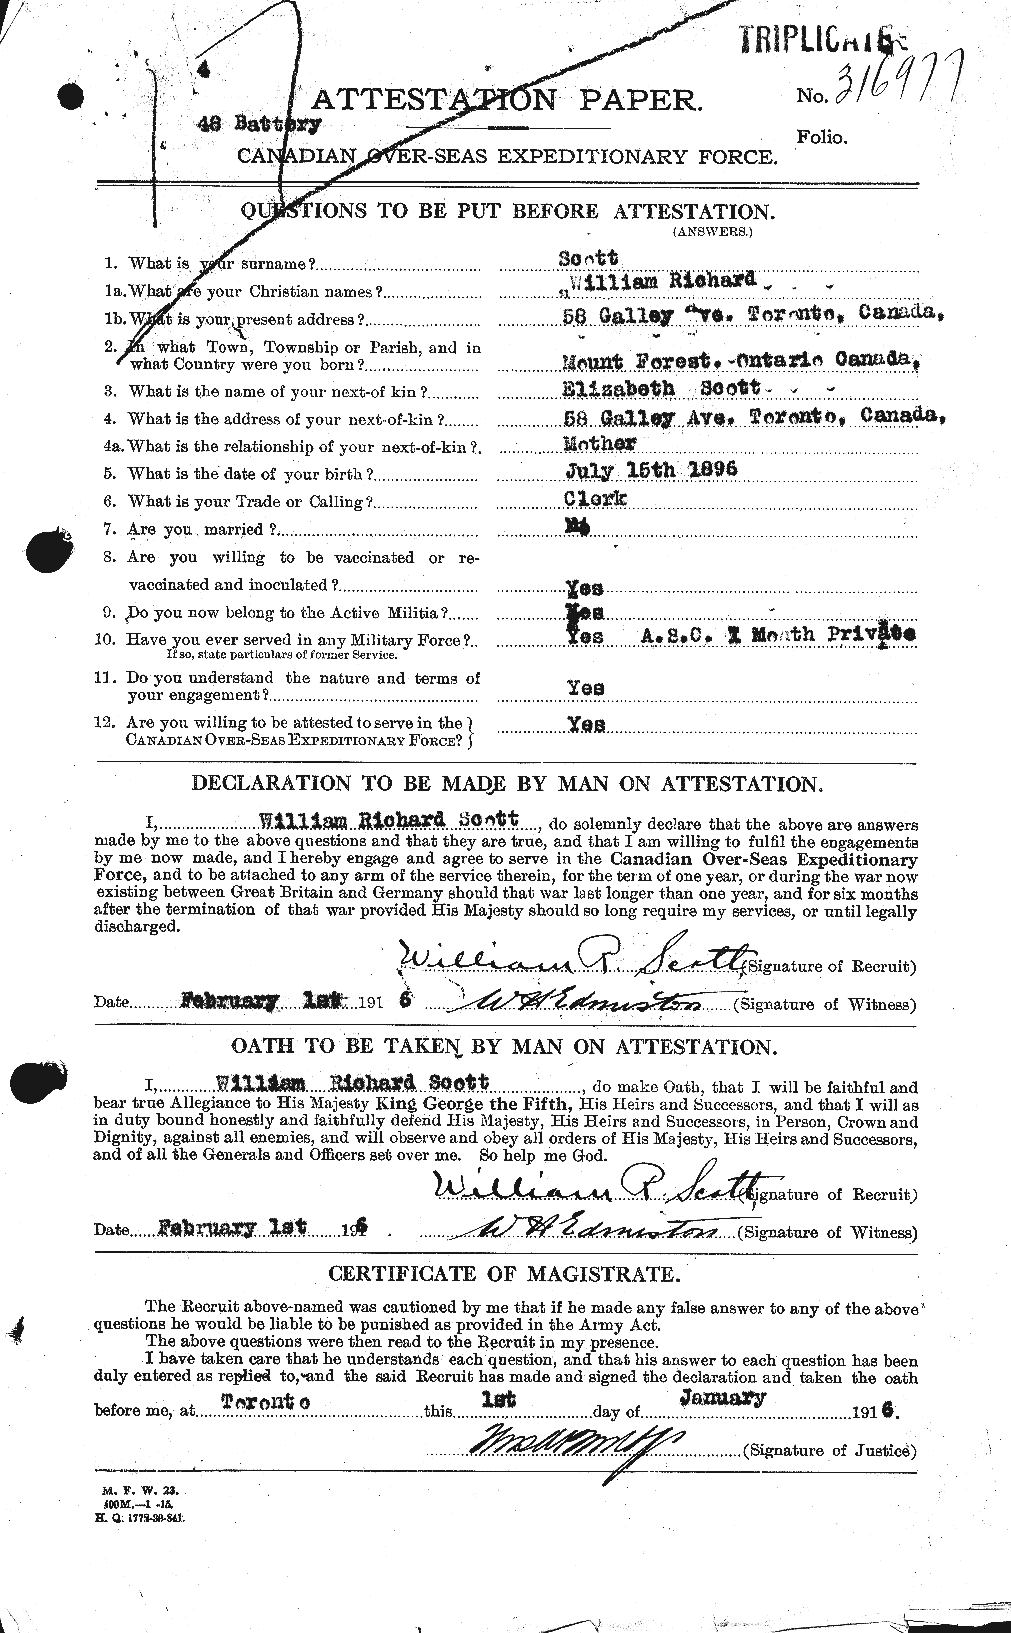 Personnel Records of the First World War - CEF 087373a